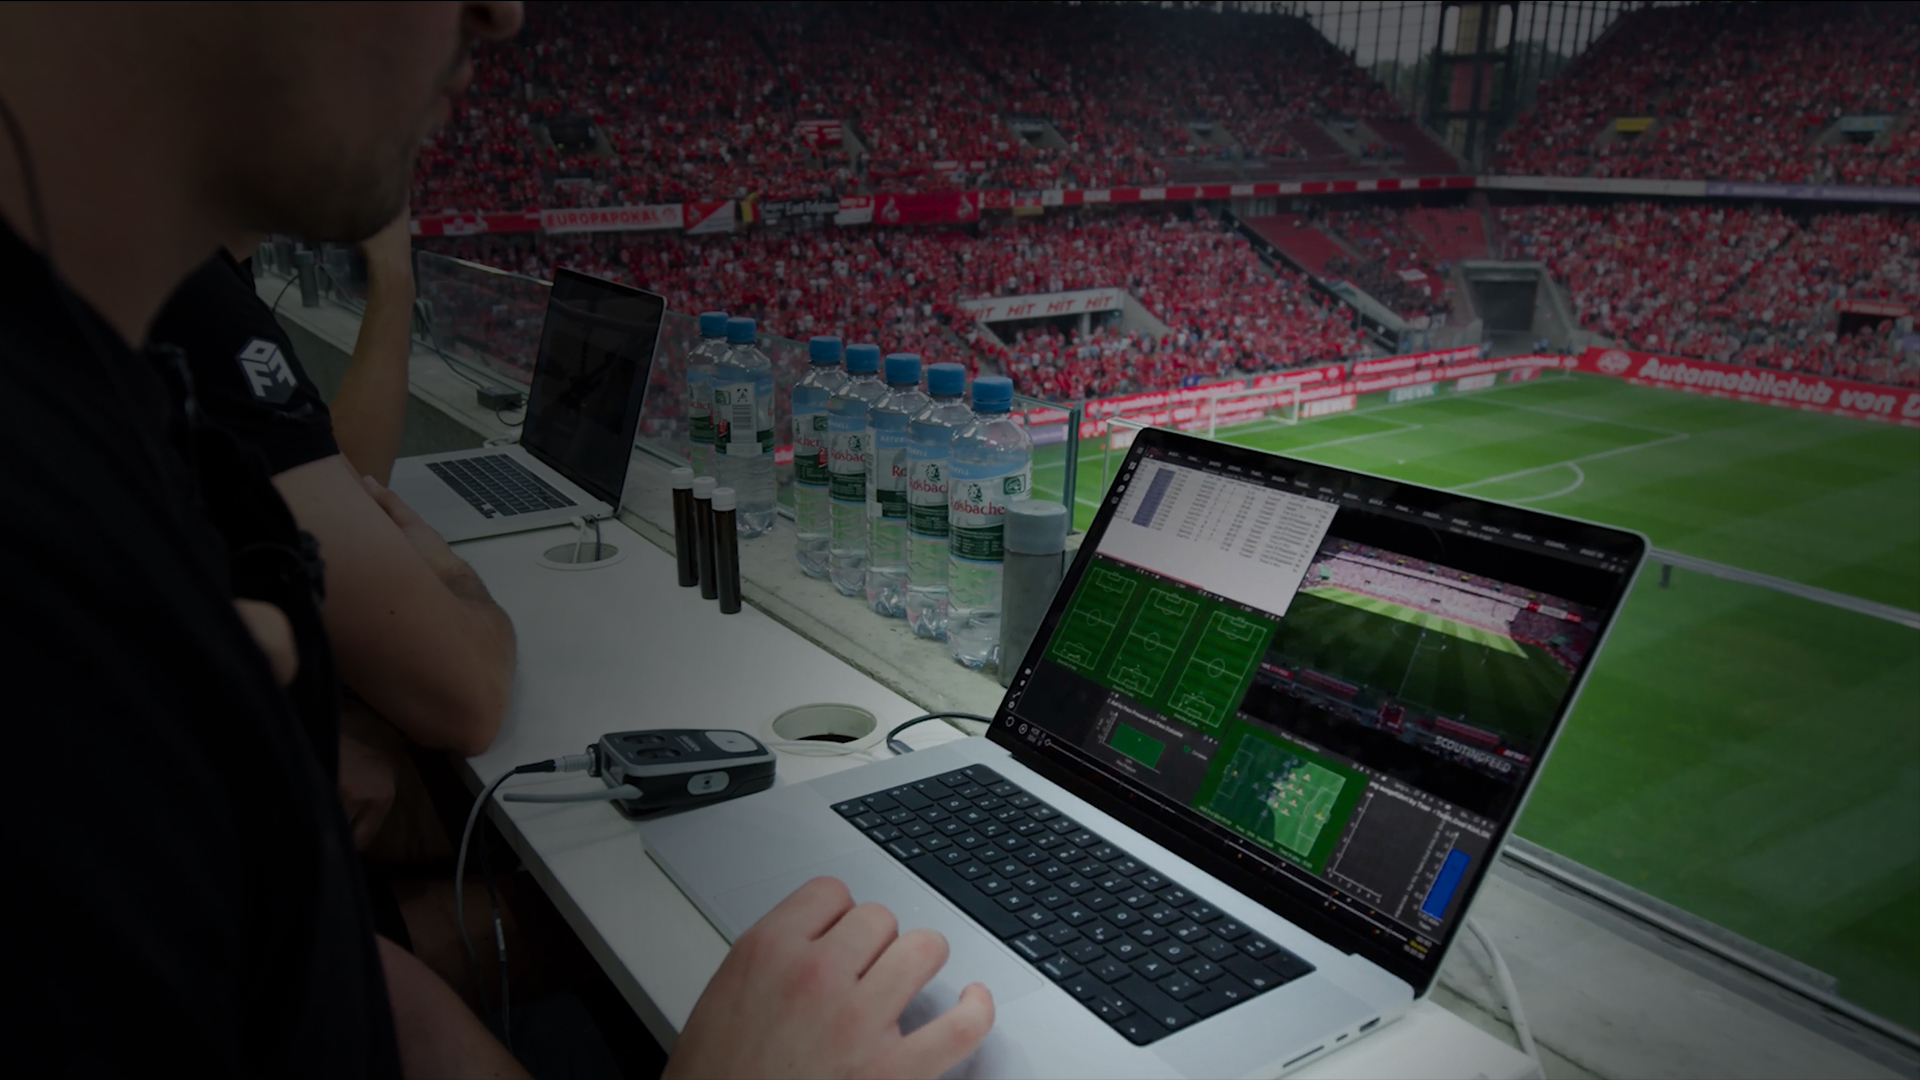 A comprehensive view of Catapult’s live analysis setup during a football match, highlighting real-time video and data integration.